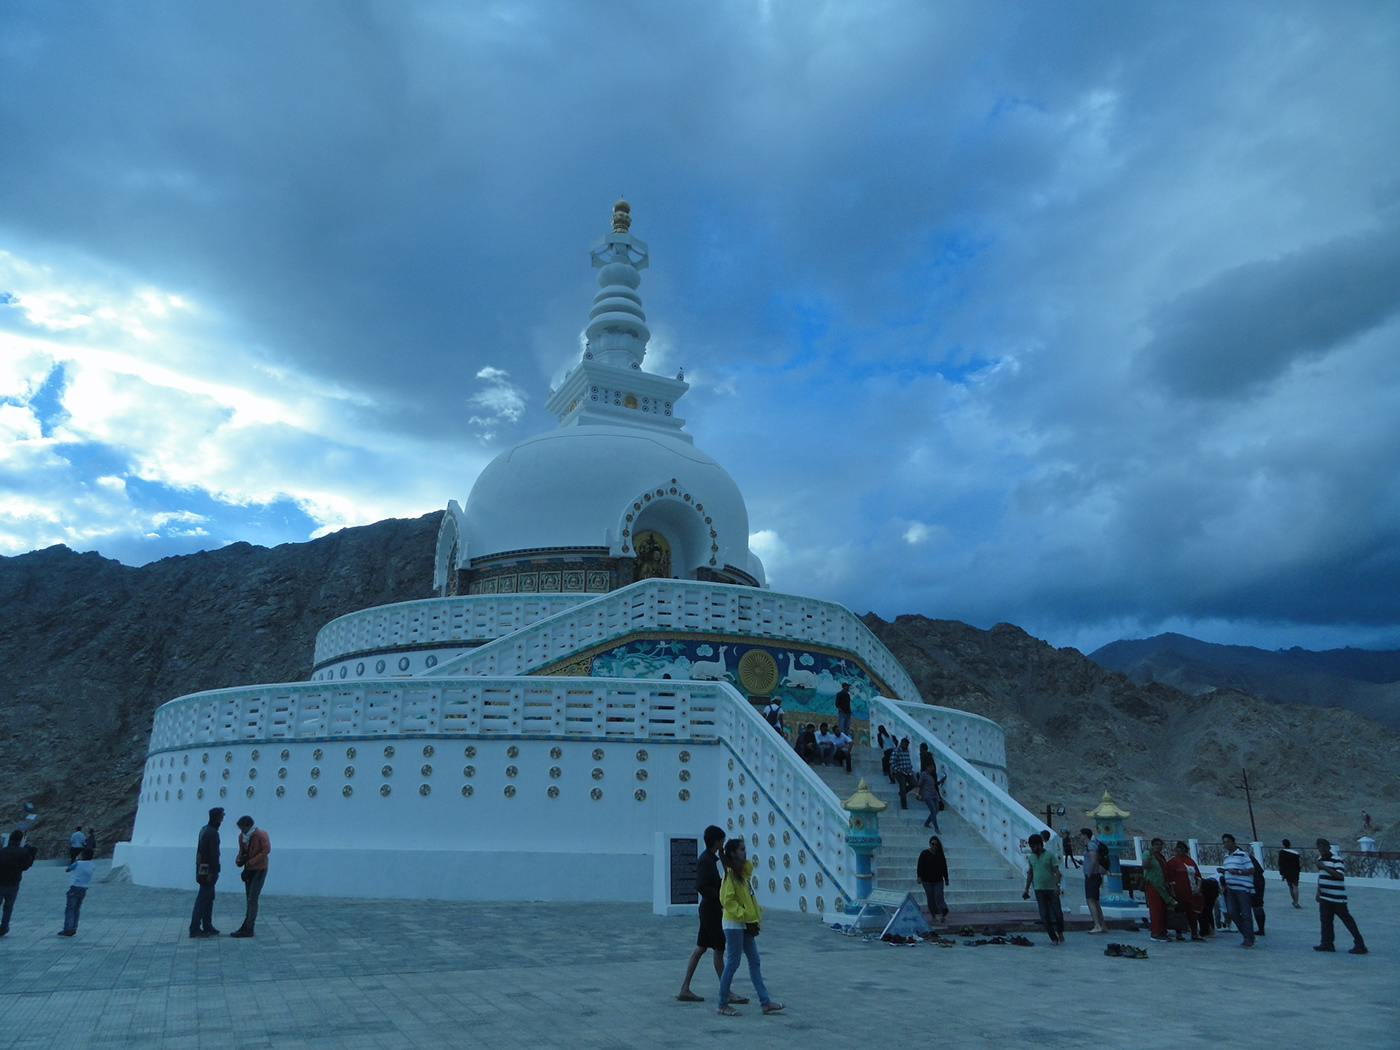 btwin cycle tour Cycling himalayas ladakh Photography  Ride for environment solo travel sony cybershot DelhitoLeh